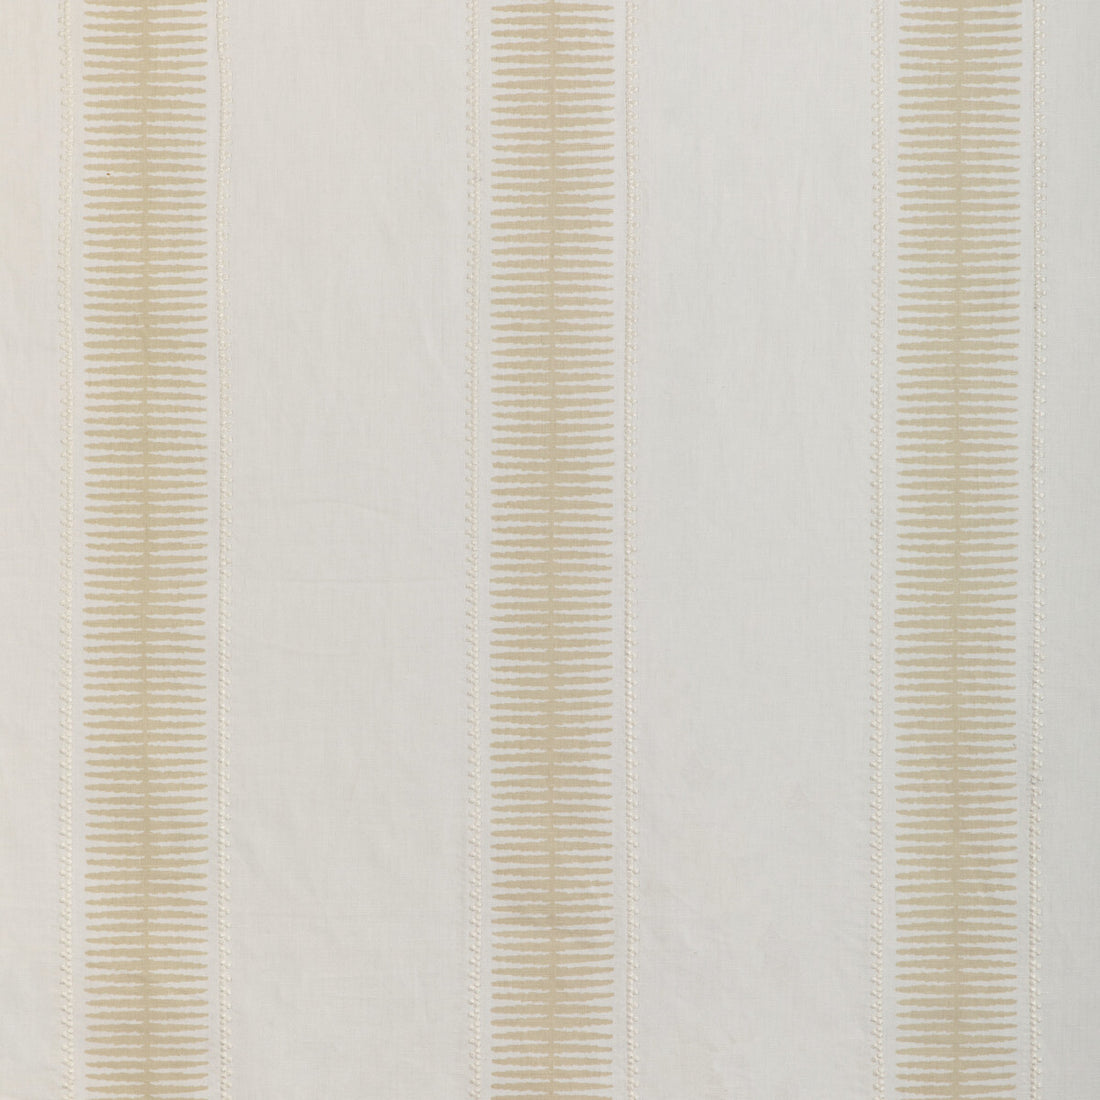 Baluster fabric in ivory color - pattern BALUSTER.16.0 - by Kravet Design in the Alexa Hampton collection